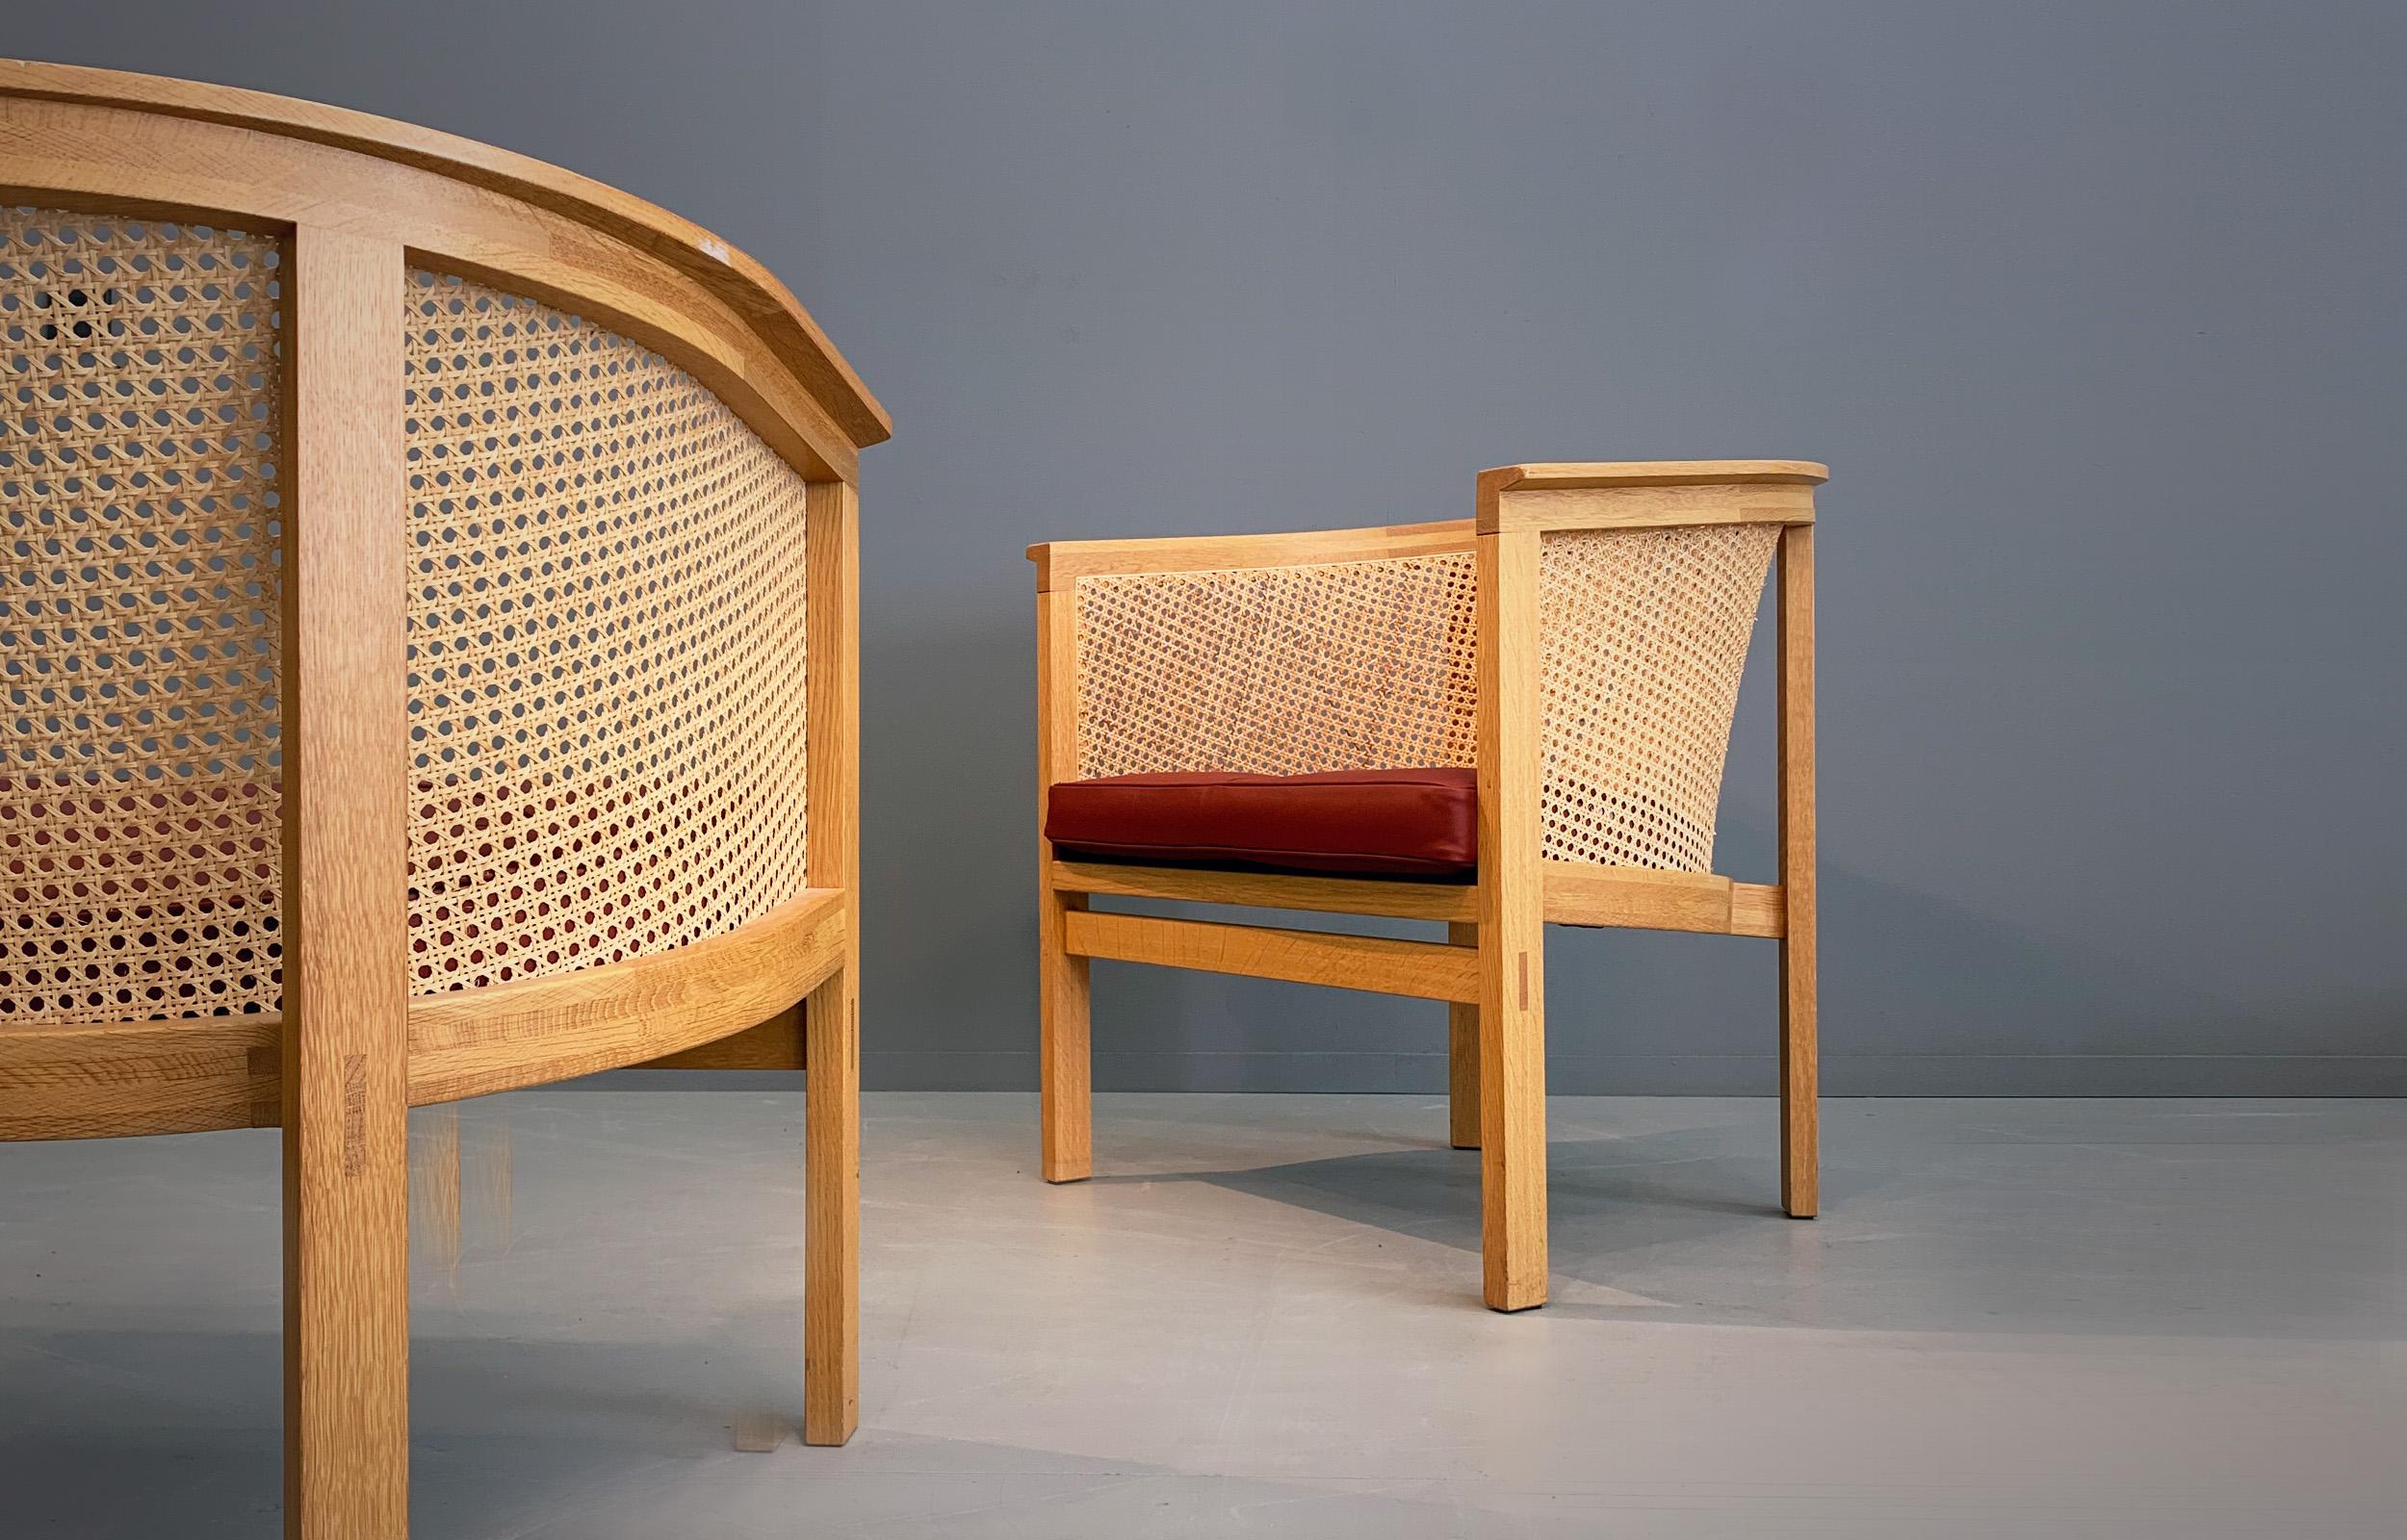 Rud Thygesen & Johnny Sorensen met while studying at the Danish School Of Arts, Crafts & Design and founded their joint design studio in 1966.

Their designs were functional, aesthetic, very appealing and of exceptional quality. Accordingly, the two